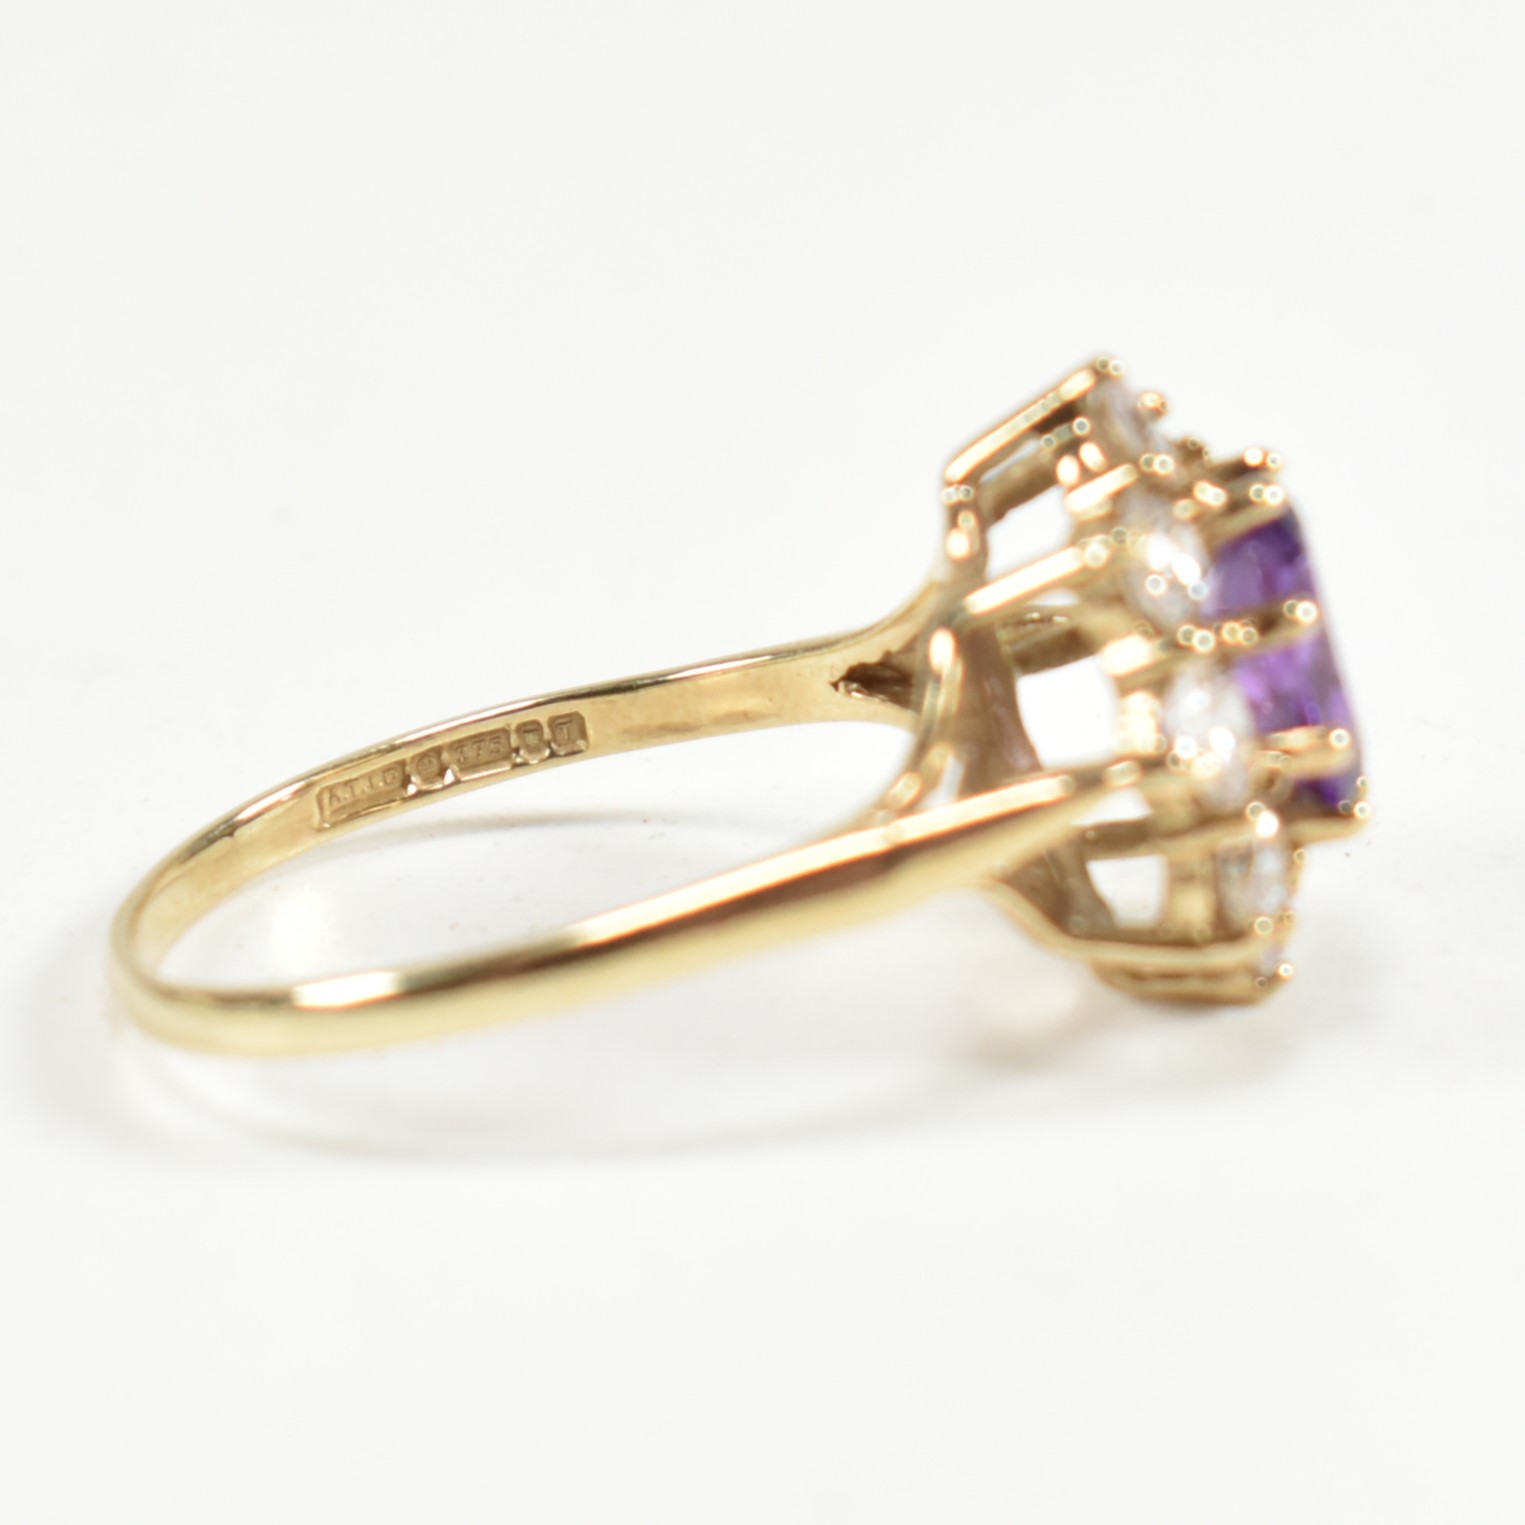 HALLMARKED 9CT GOLD AMETHYST & WHITE STONE CLUSTER RING - Image 5 of 9